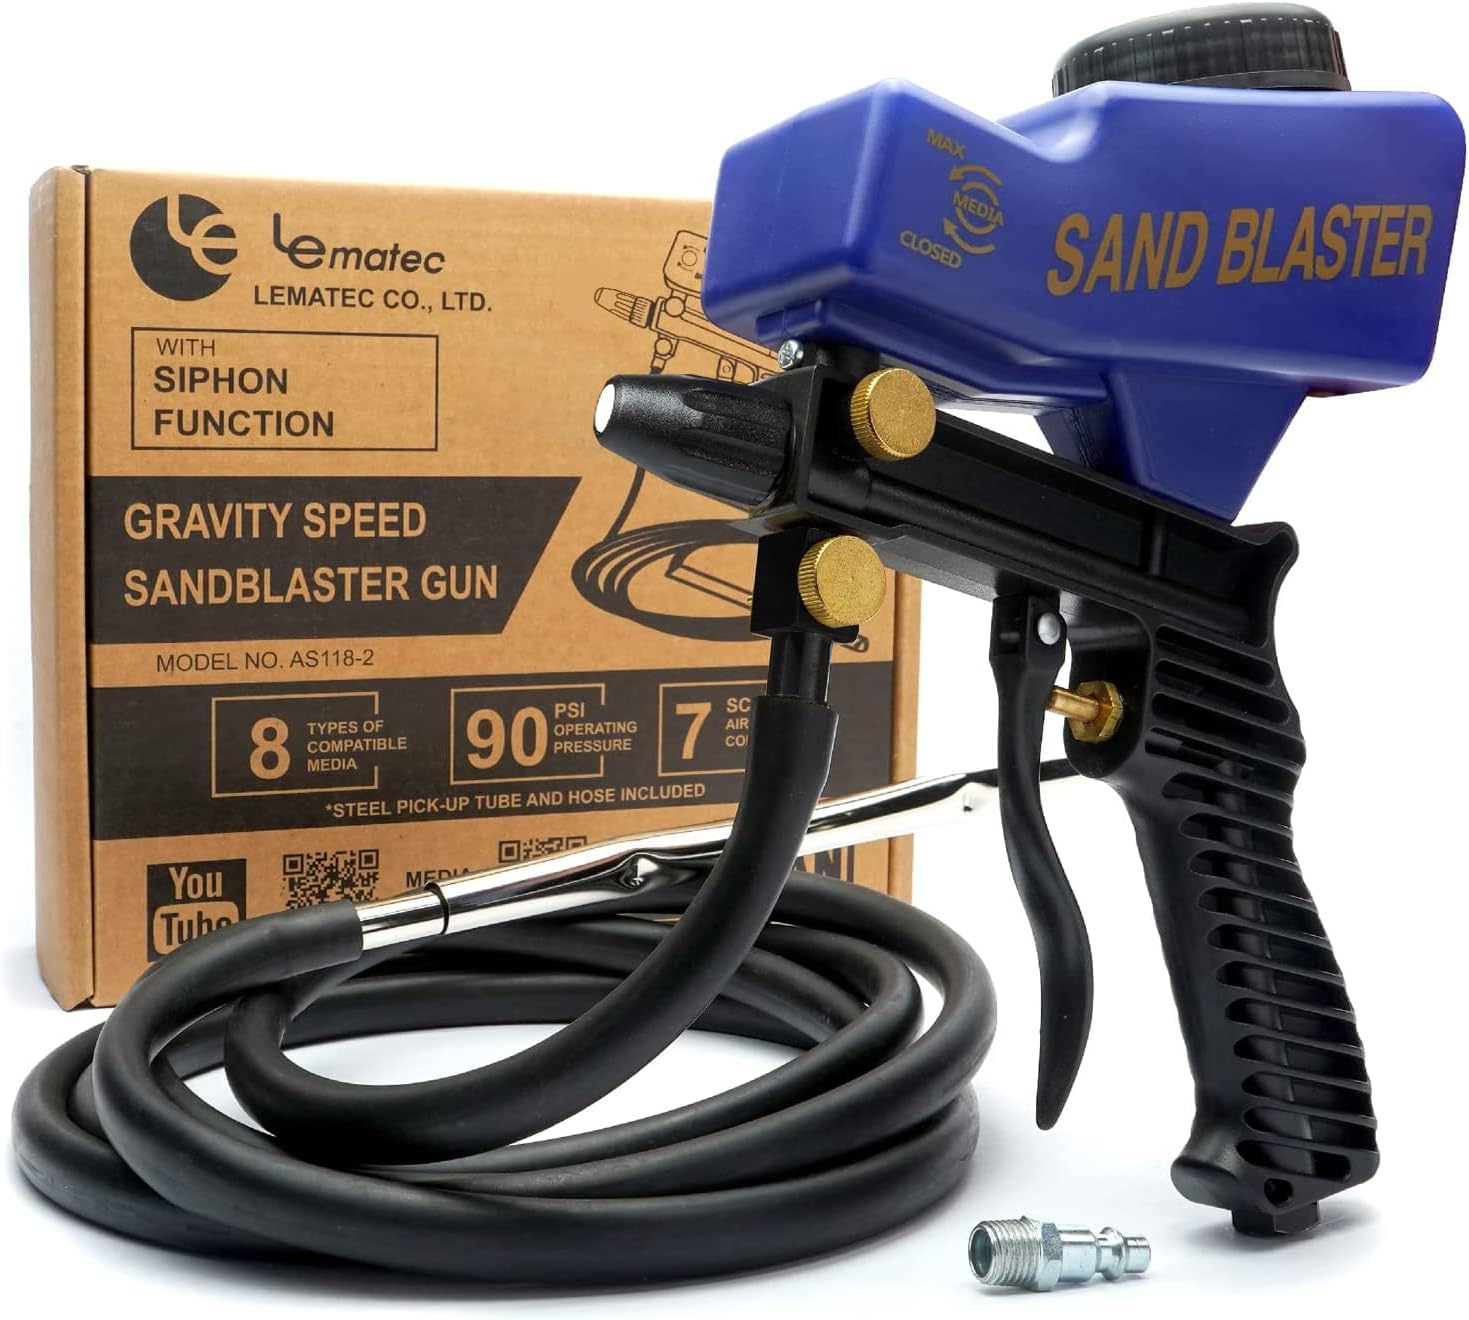 Ubiquitous Lematec LE Lematec Sand Blaster Gun Kit, Sandblaster, Rust Remover and Paint Stripper with Continuous Blasting, AS118-2 Media Blaster